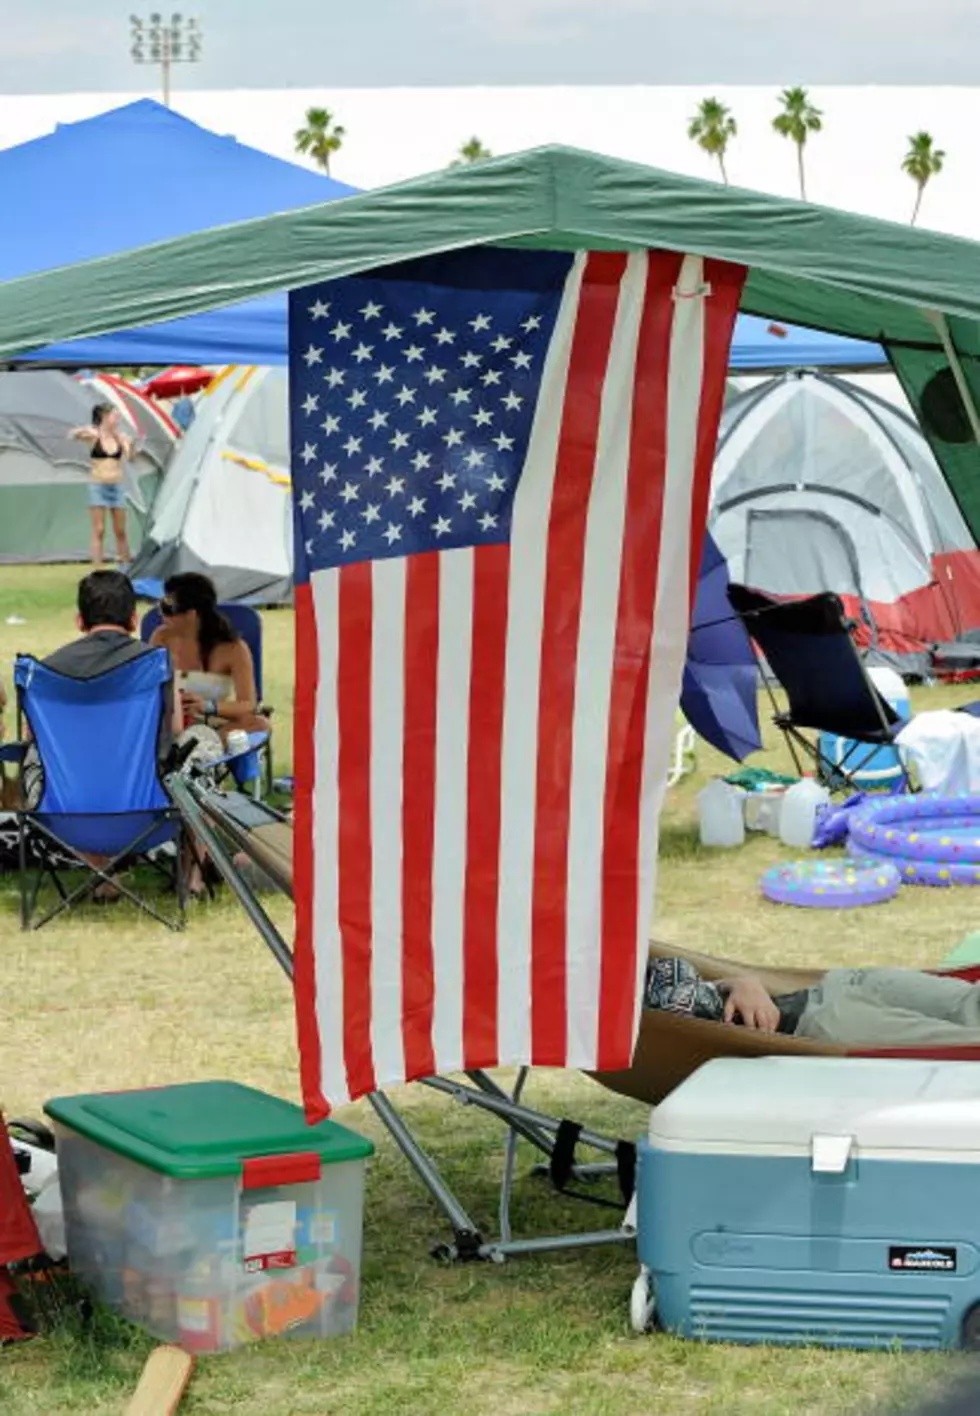 Minnesota Shutdown: Campgrounds Close Up, Campers Pack Up